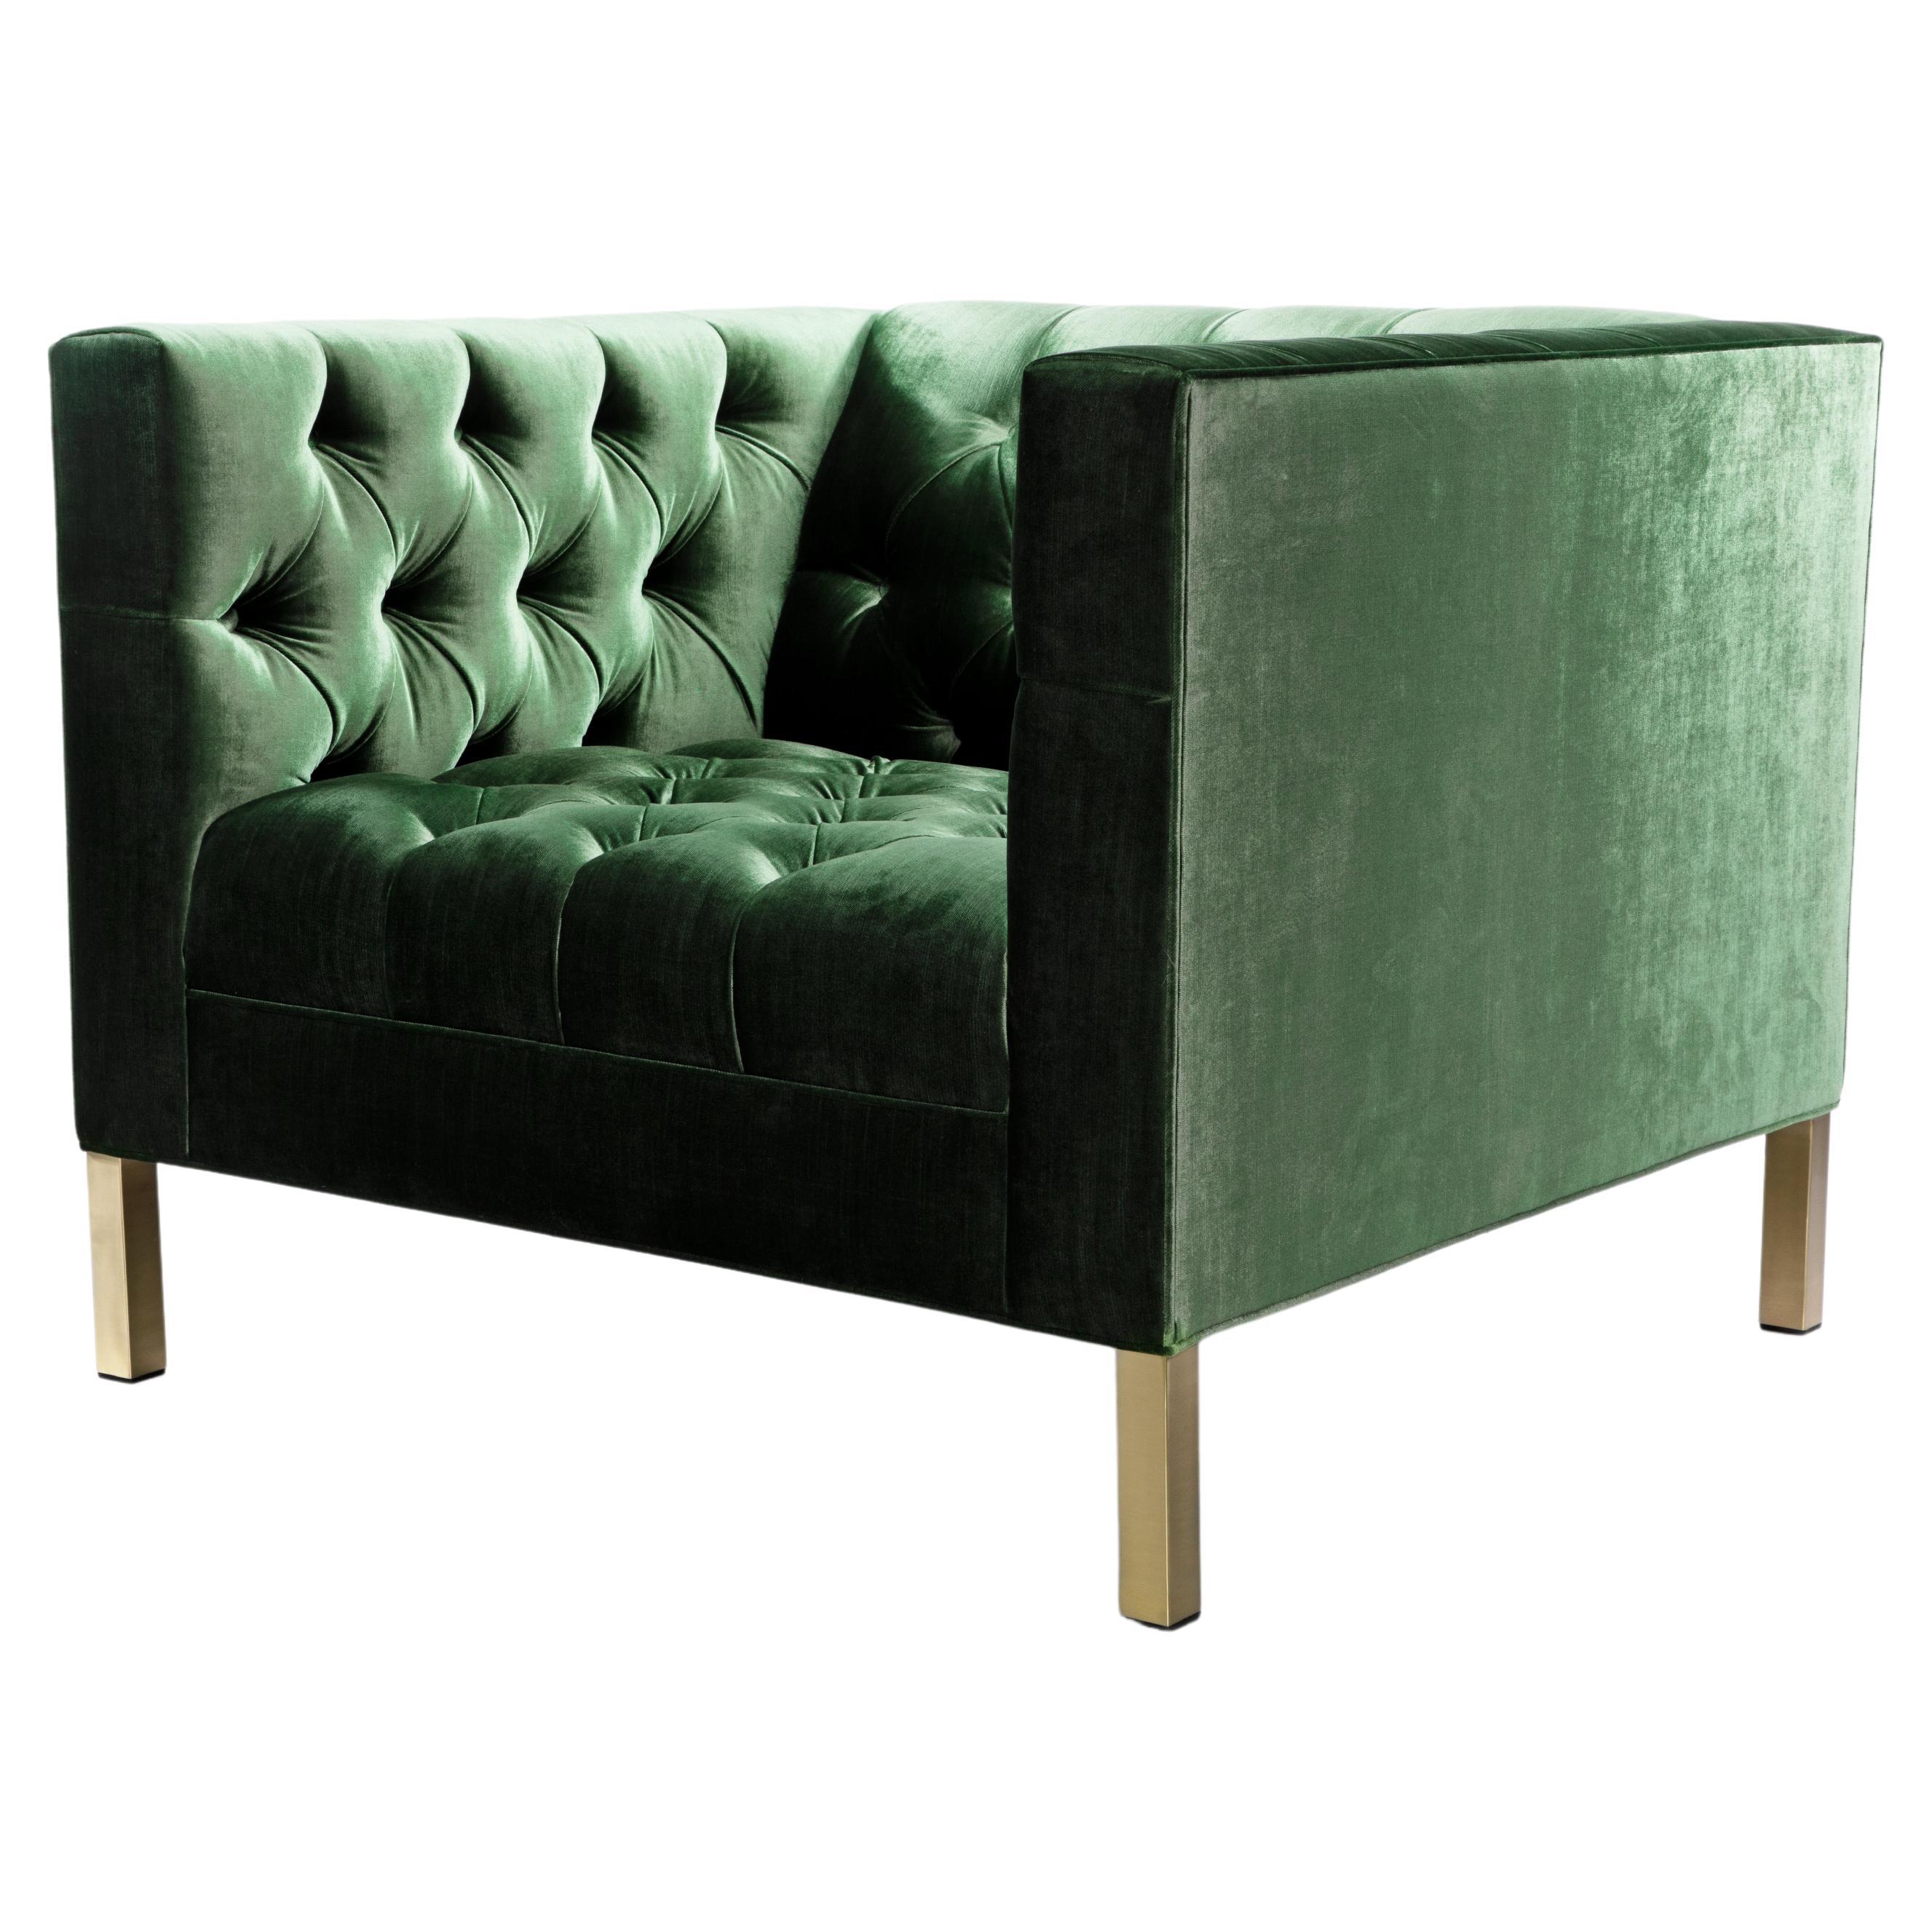 Contemporary Capri Tufted Sofa Handcrafted by James by Jimmy Delaurentis